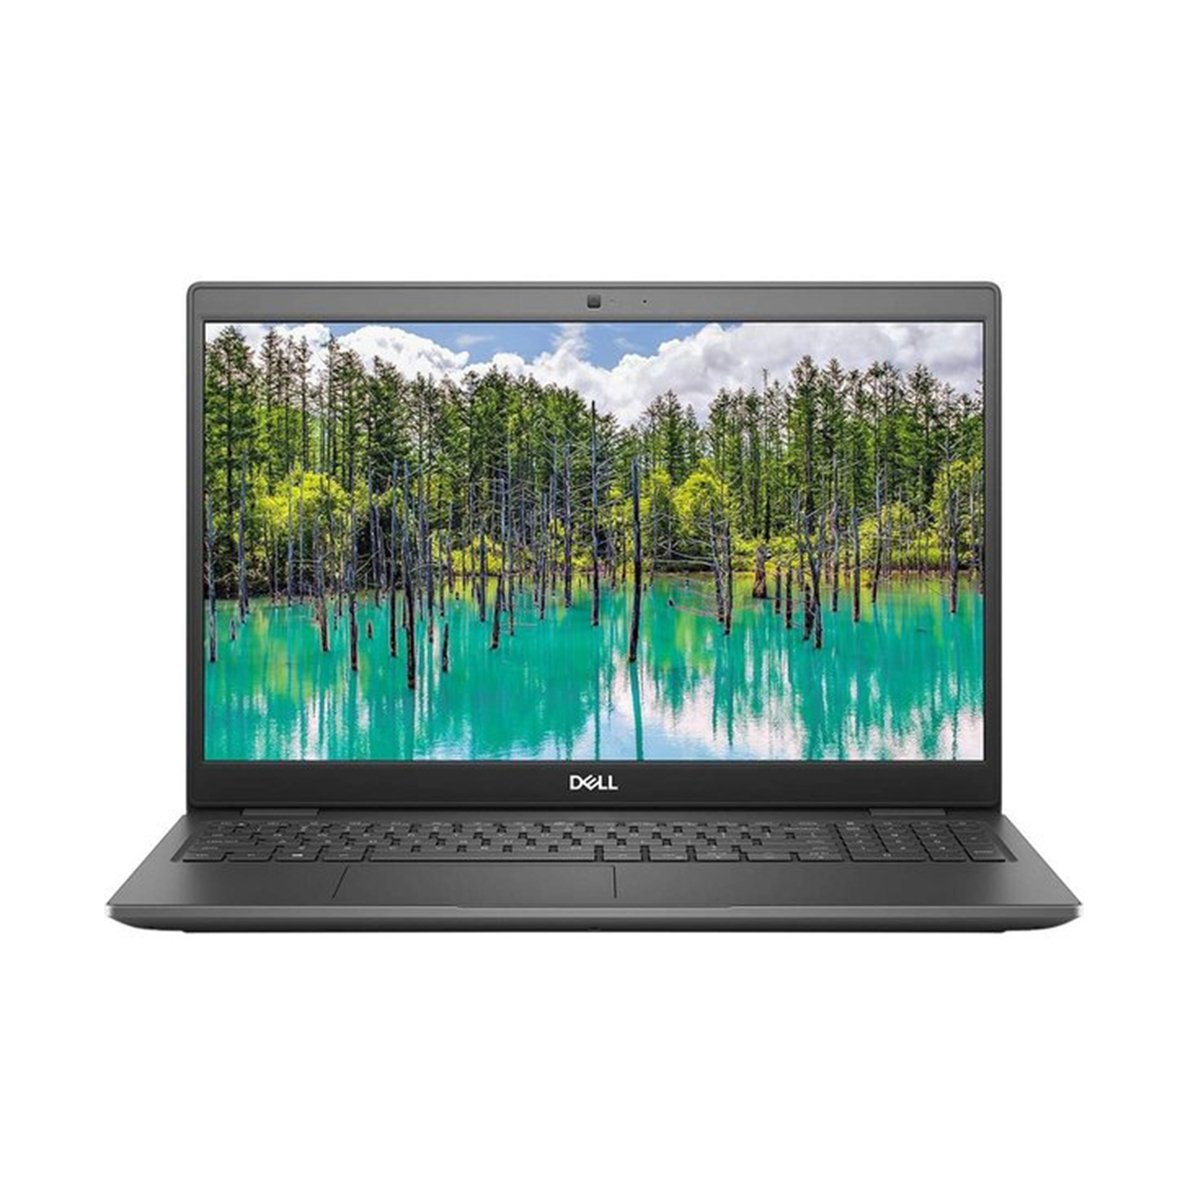 Dell Vostro 3510(3510-VOS-8060)Laptop,Core i5-1135G7,8GB RAM,1TB HDD,Intel Iris Xe Graphics with shared graphics memory,Win10,15.6inch HD Black,English/Arabic Keyboard